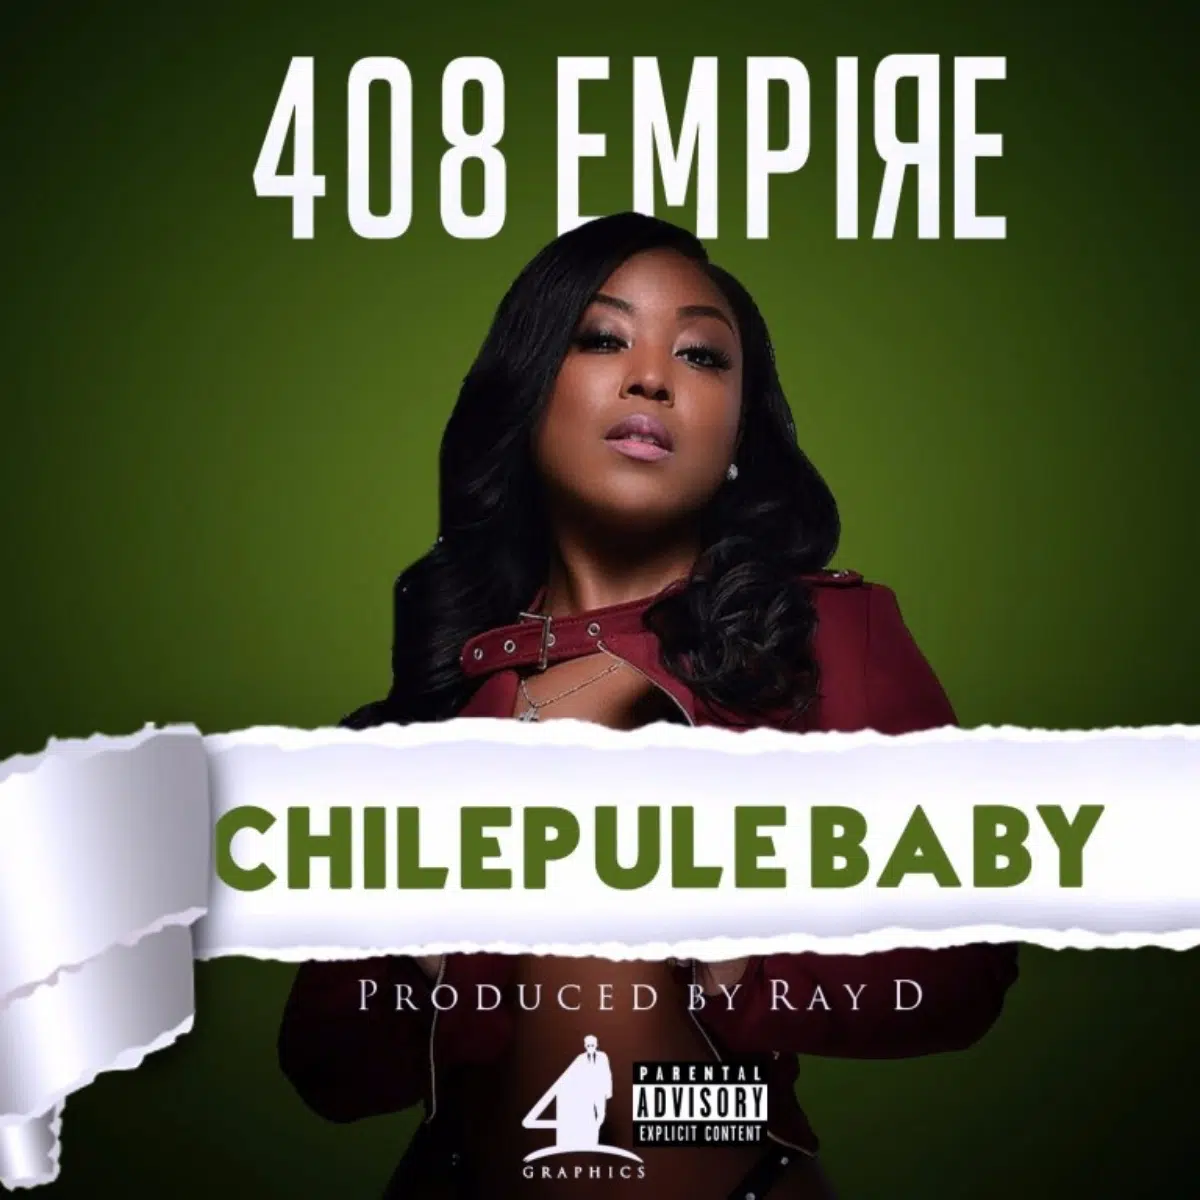 DOWNLOAD: 408 Empire – “Chilepule Baby” Mp3